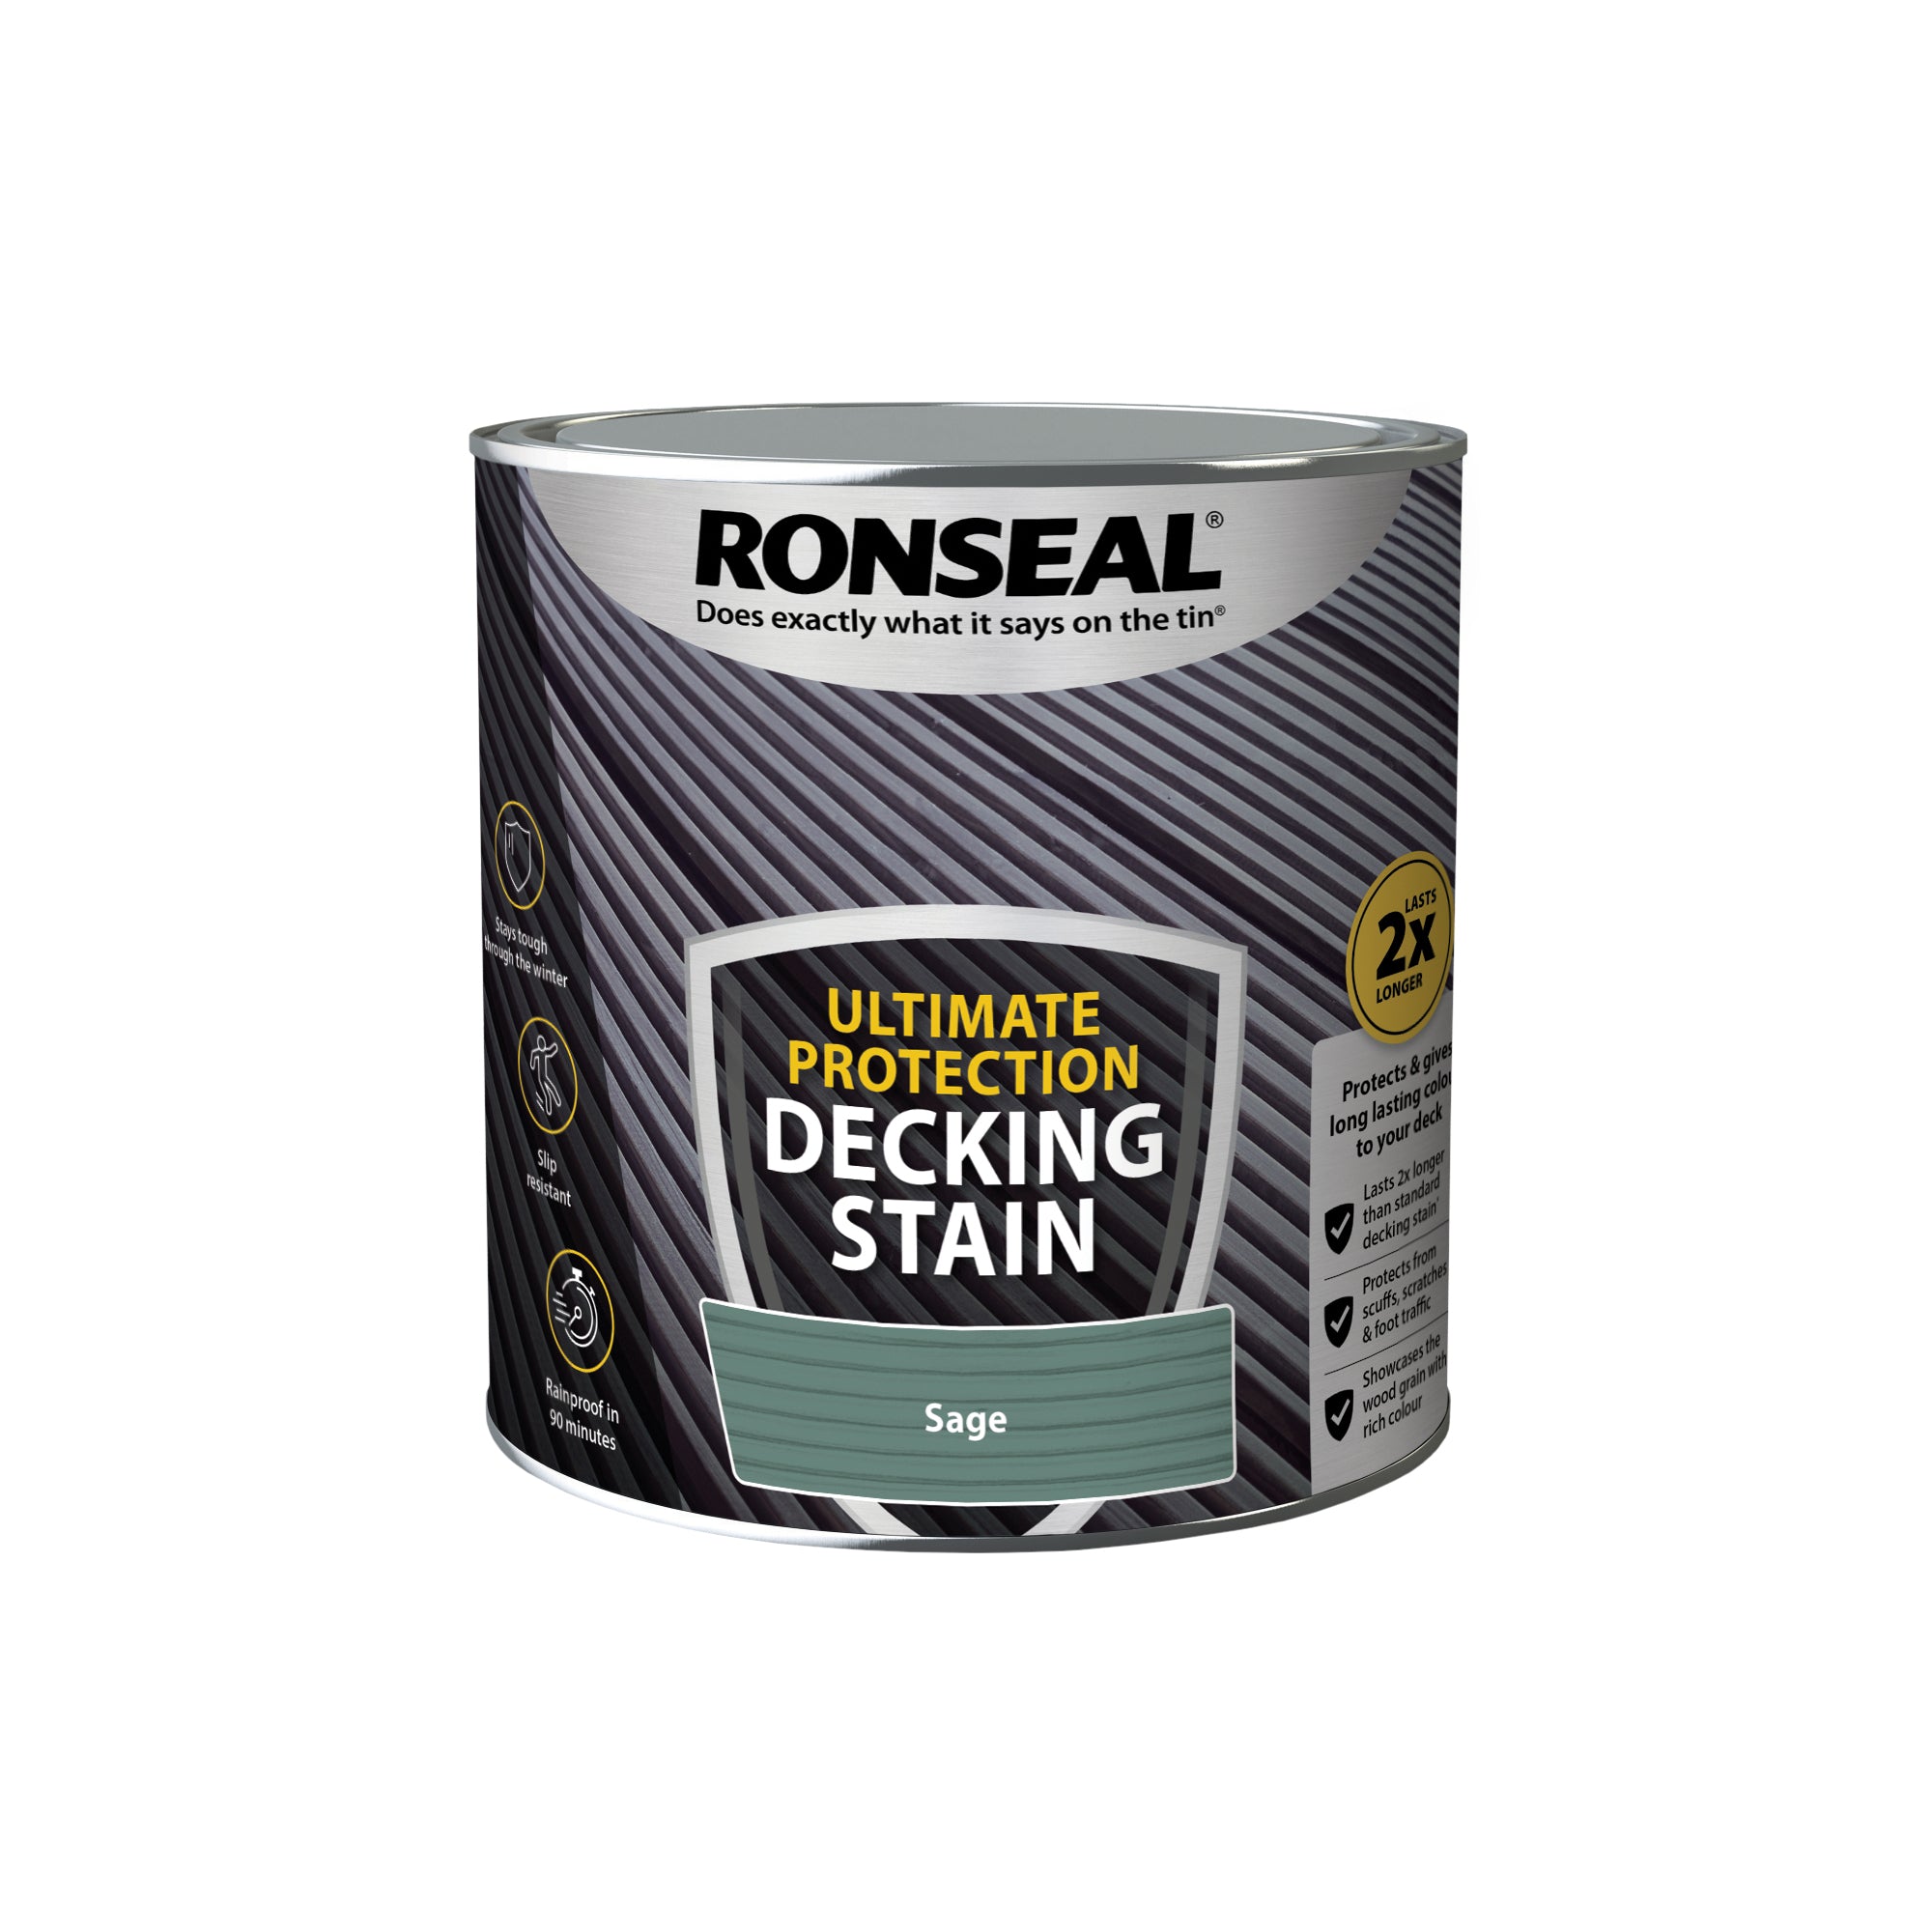 Ronseal-Ultimate-Protection-Decking-Stain-Sage-2.5L